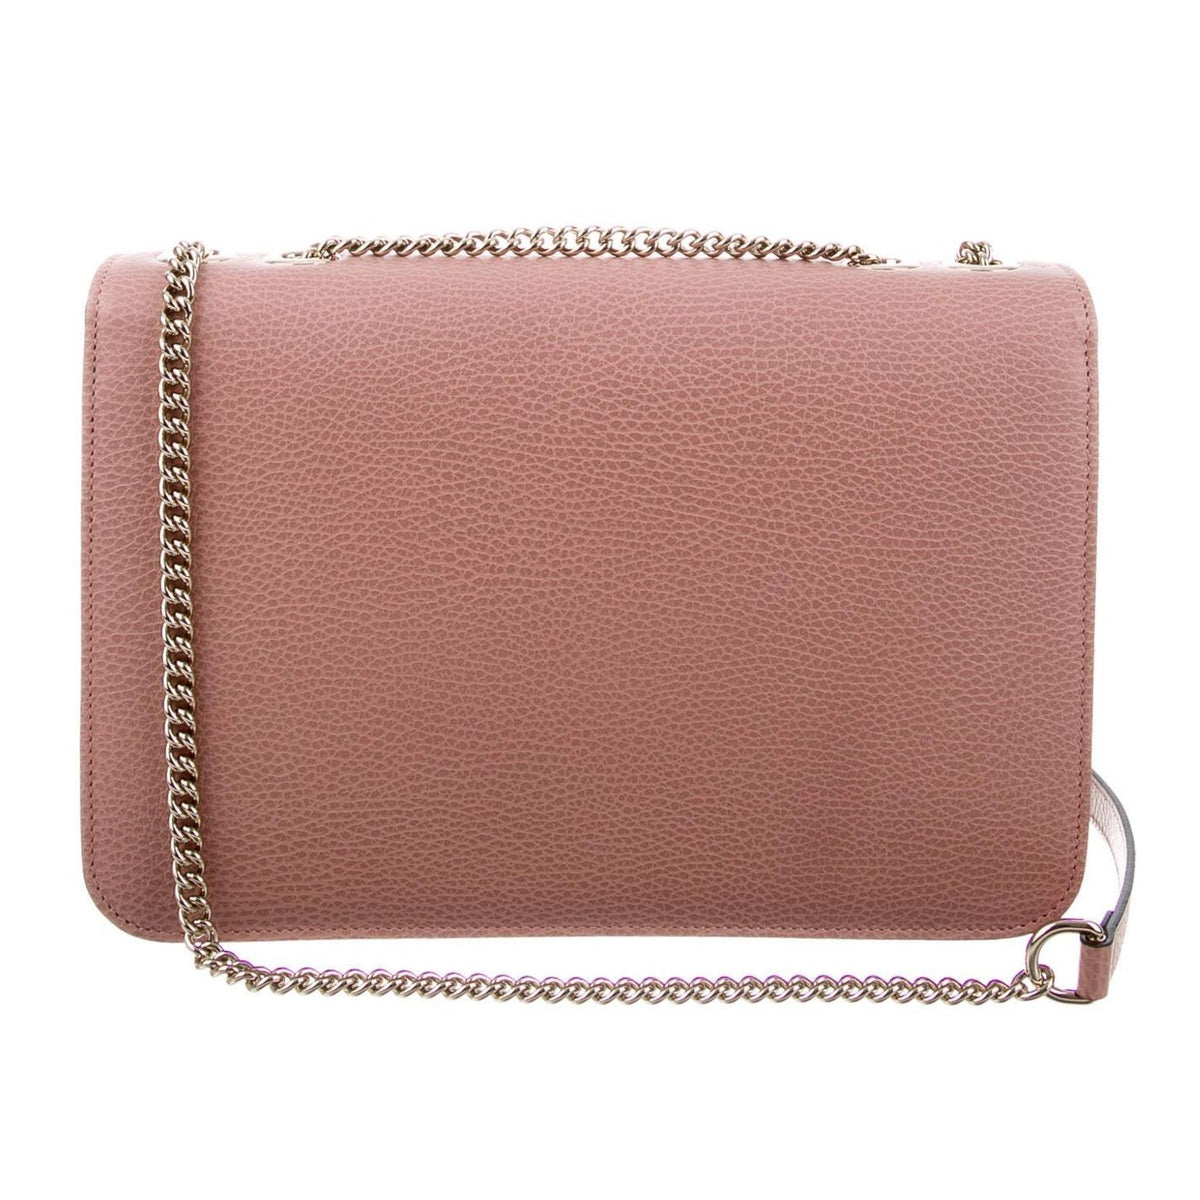 NWT Gucci Interlocking GG Chain Pink Leather Cross Body large top handle Bag